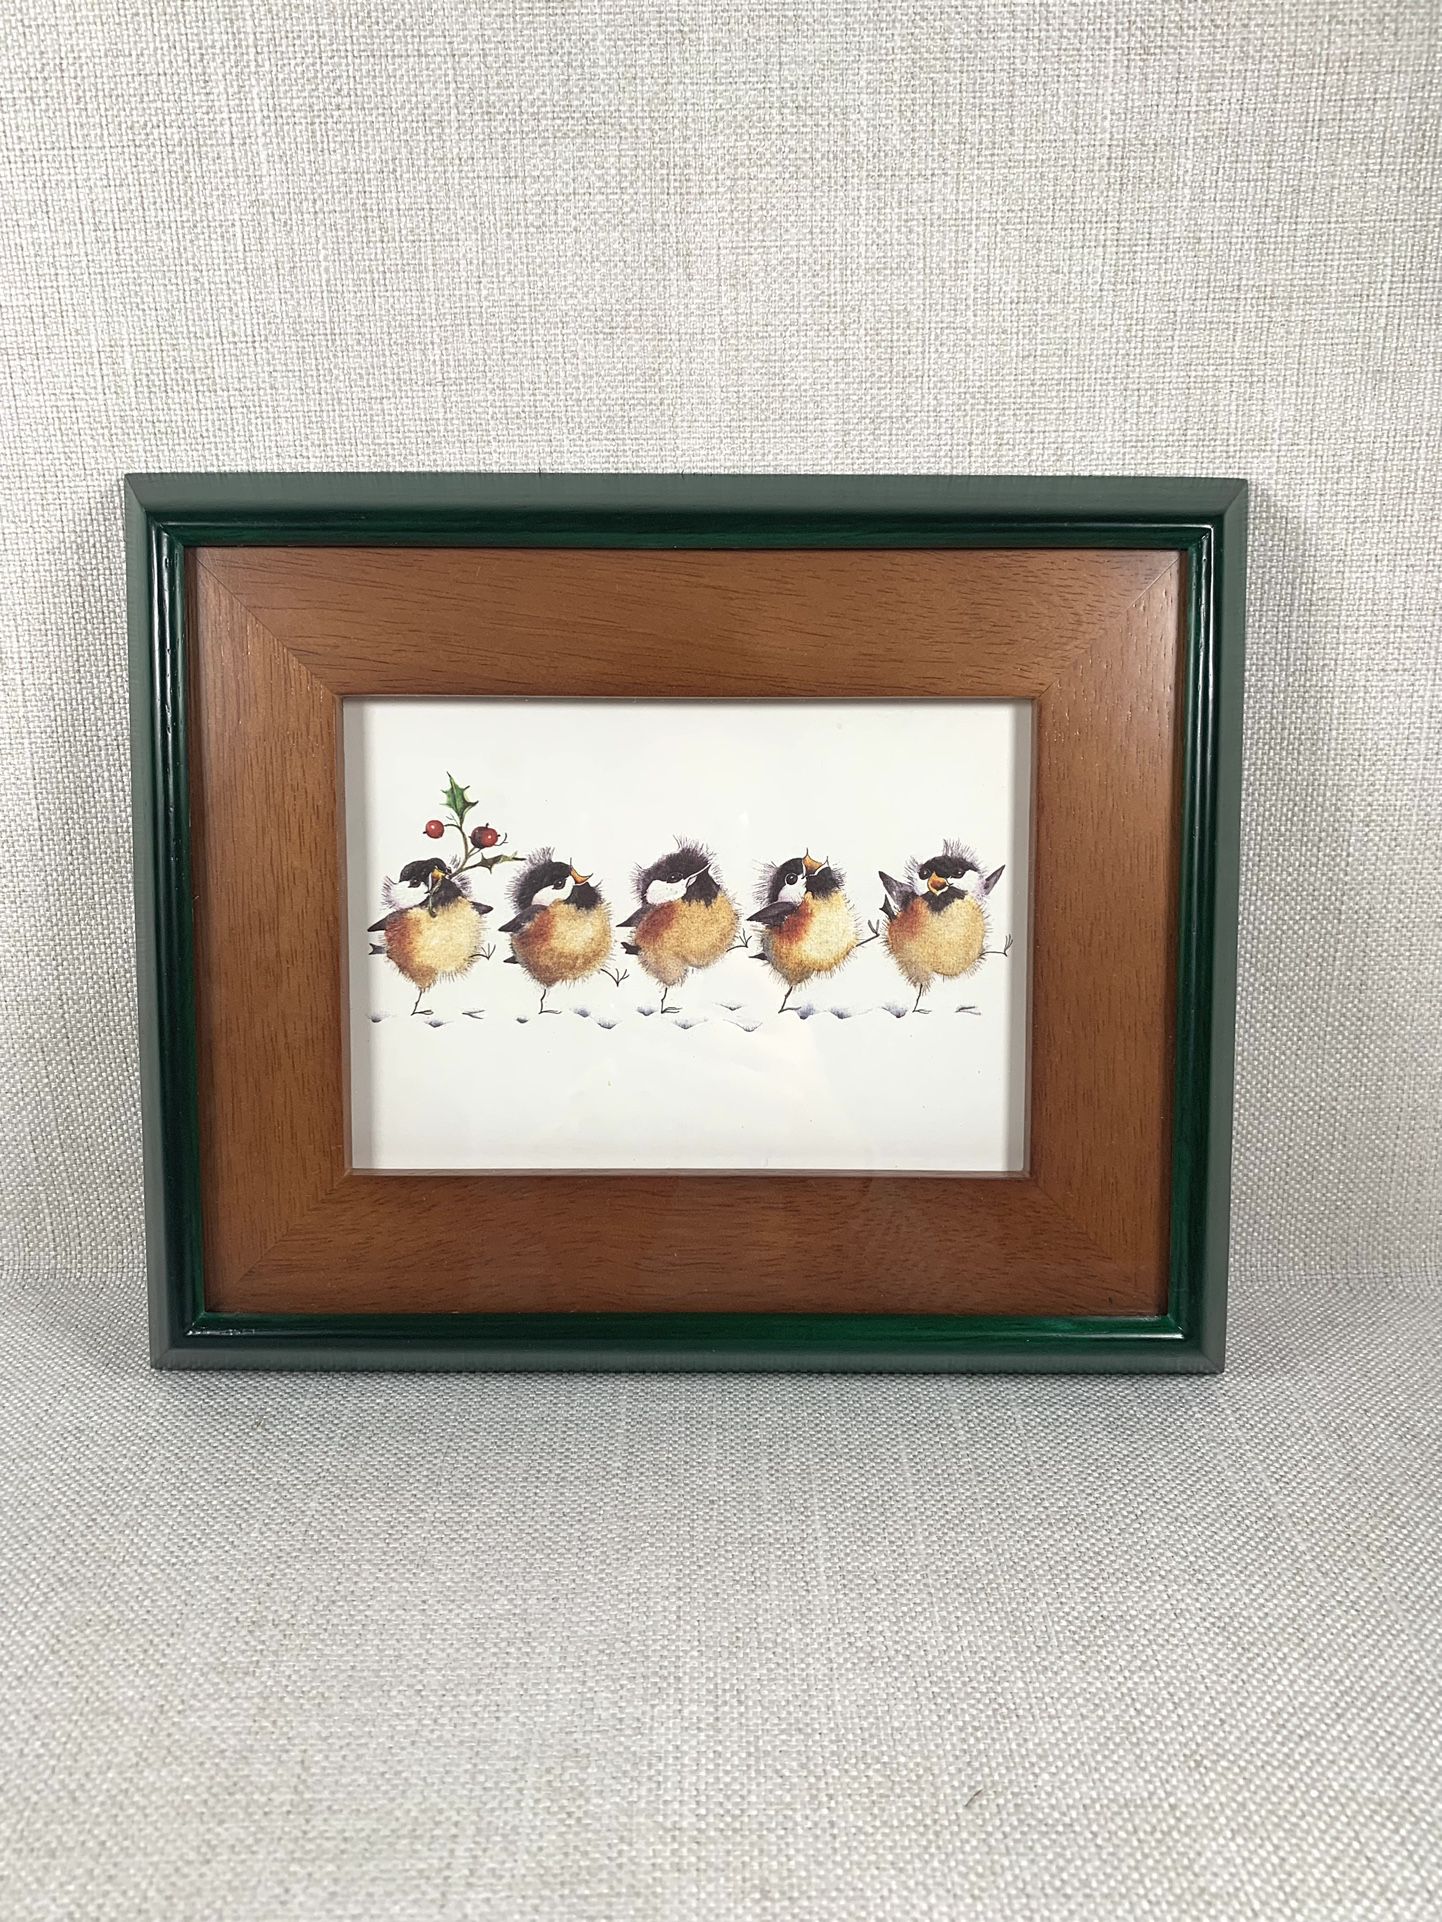 Wooden  Farmhouse Green/Walnut Picture Frame with Singing Birds Chicks. 